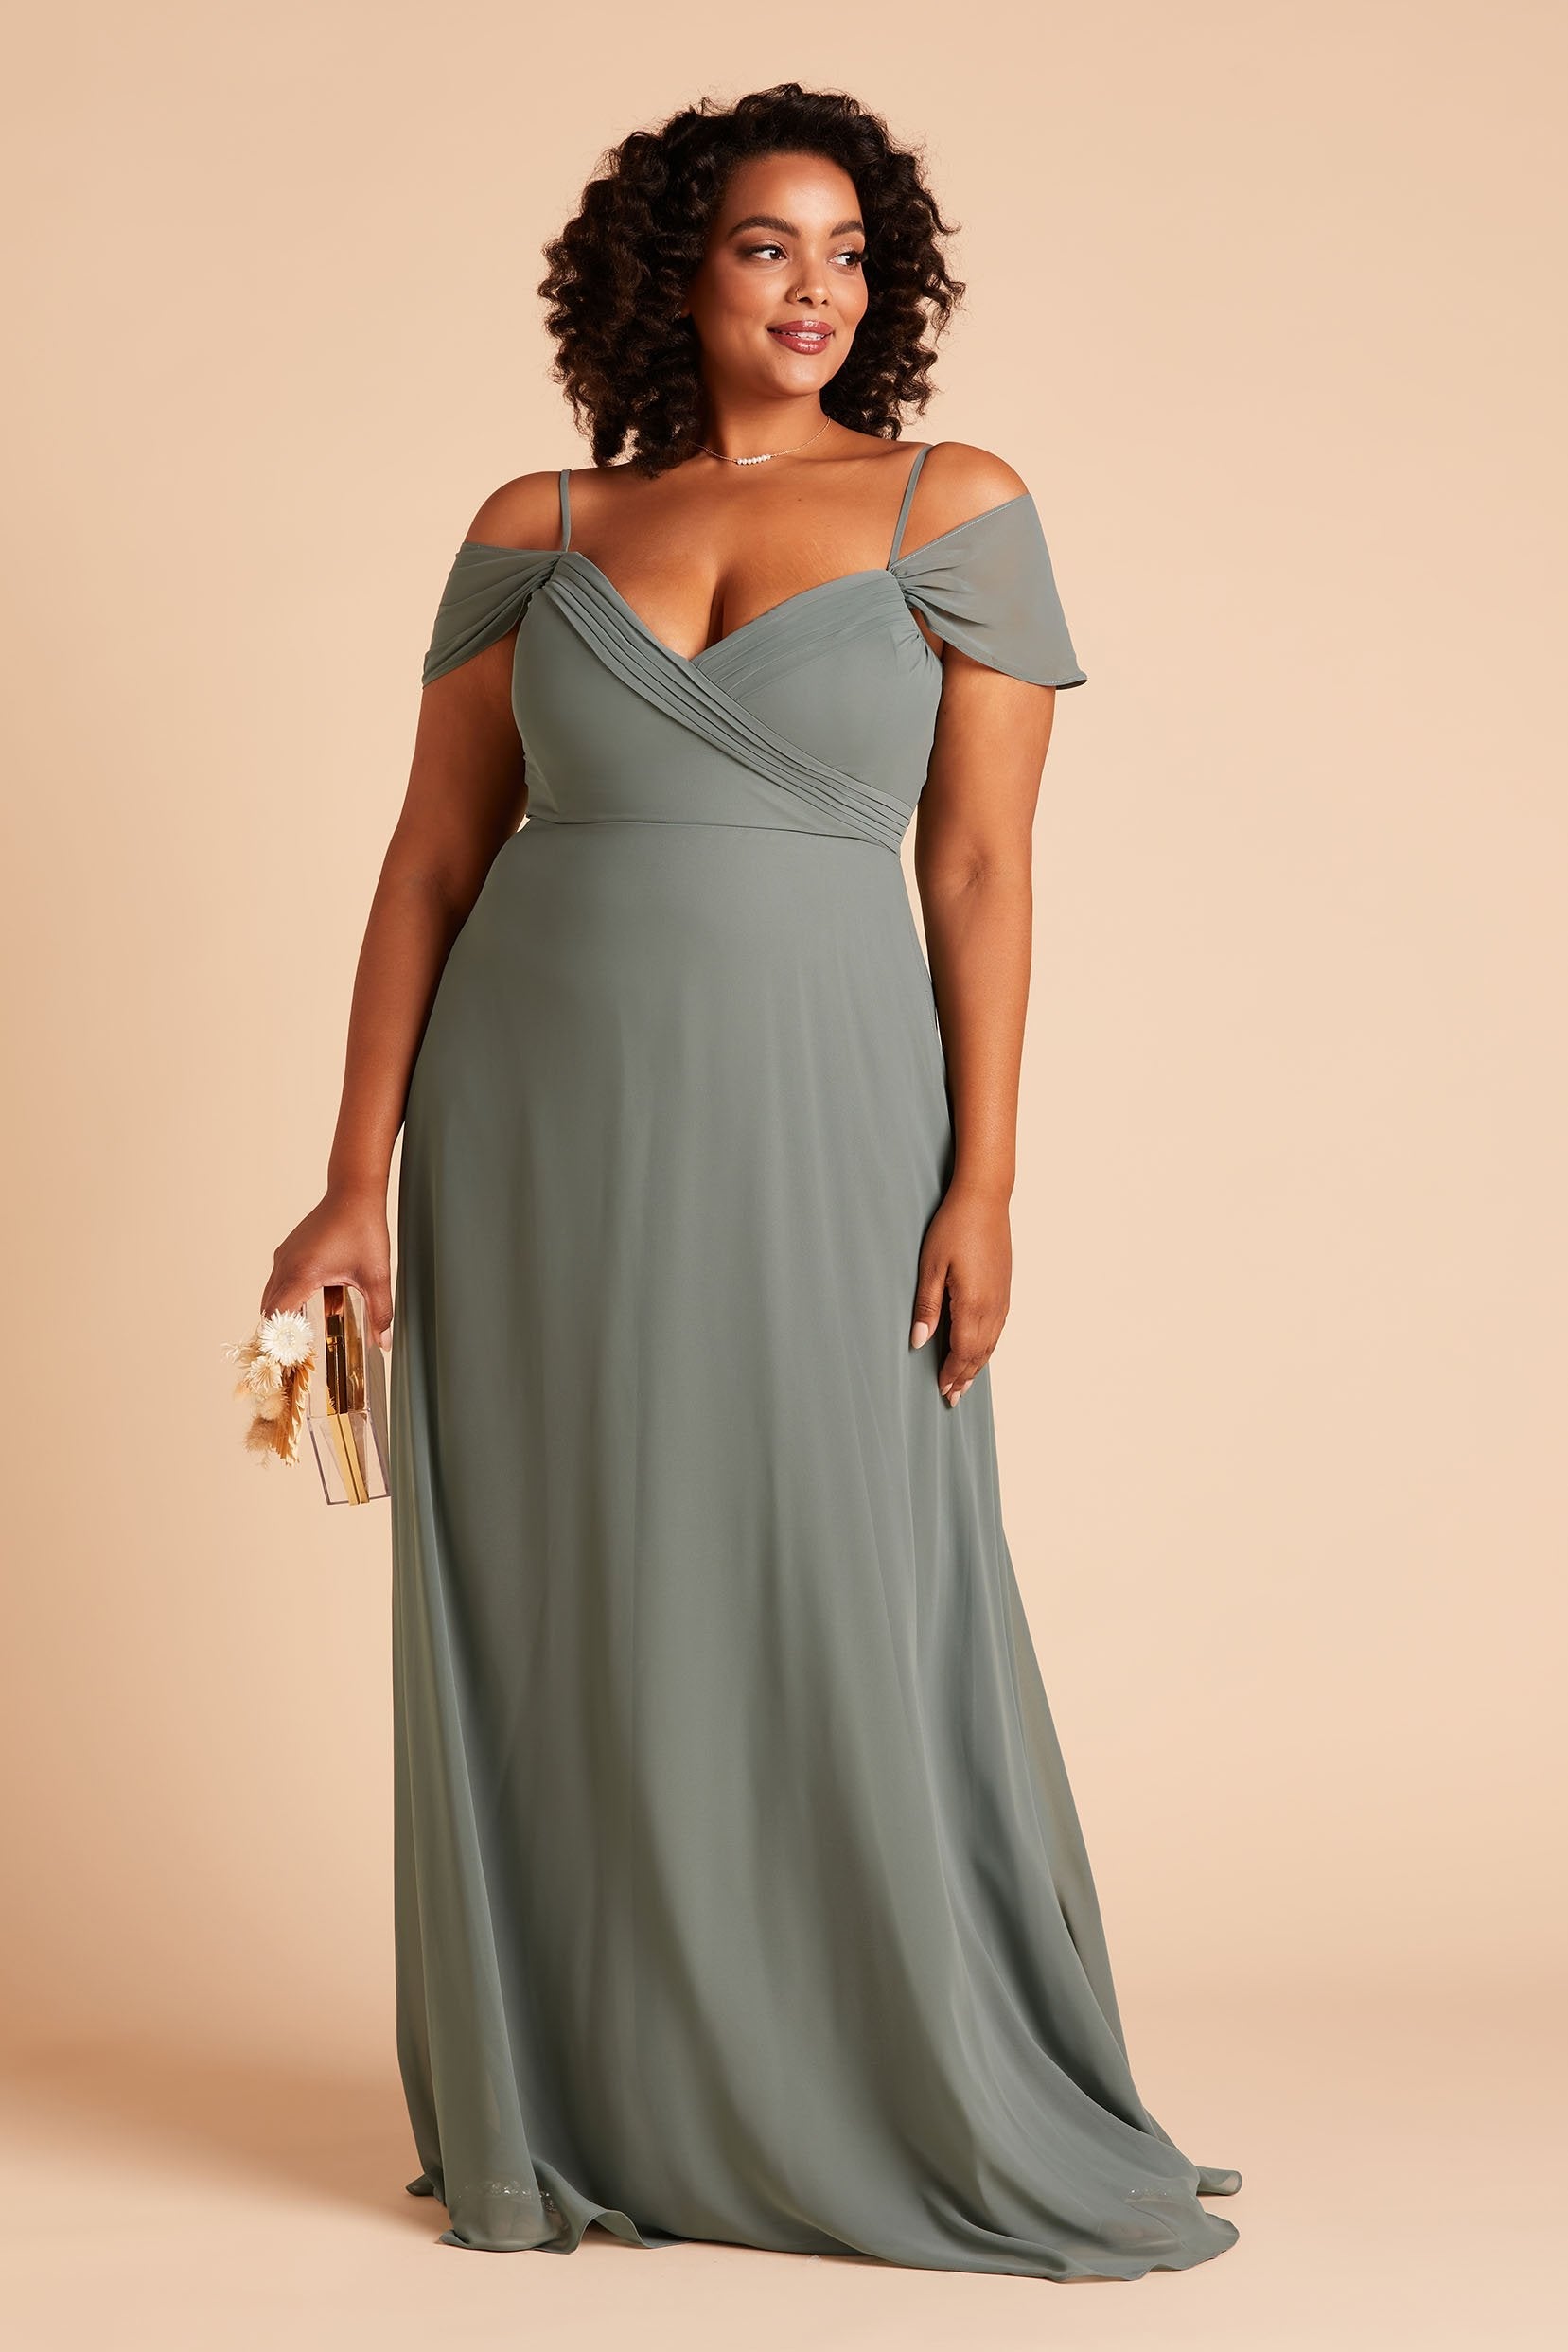 Spence convertible plus size bridesmaid dress in sea glass green chiffon by Birdy Grey, front view